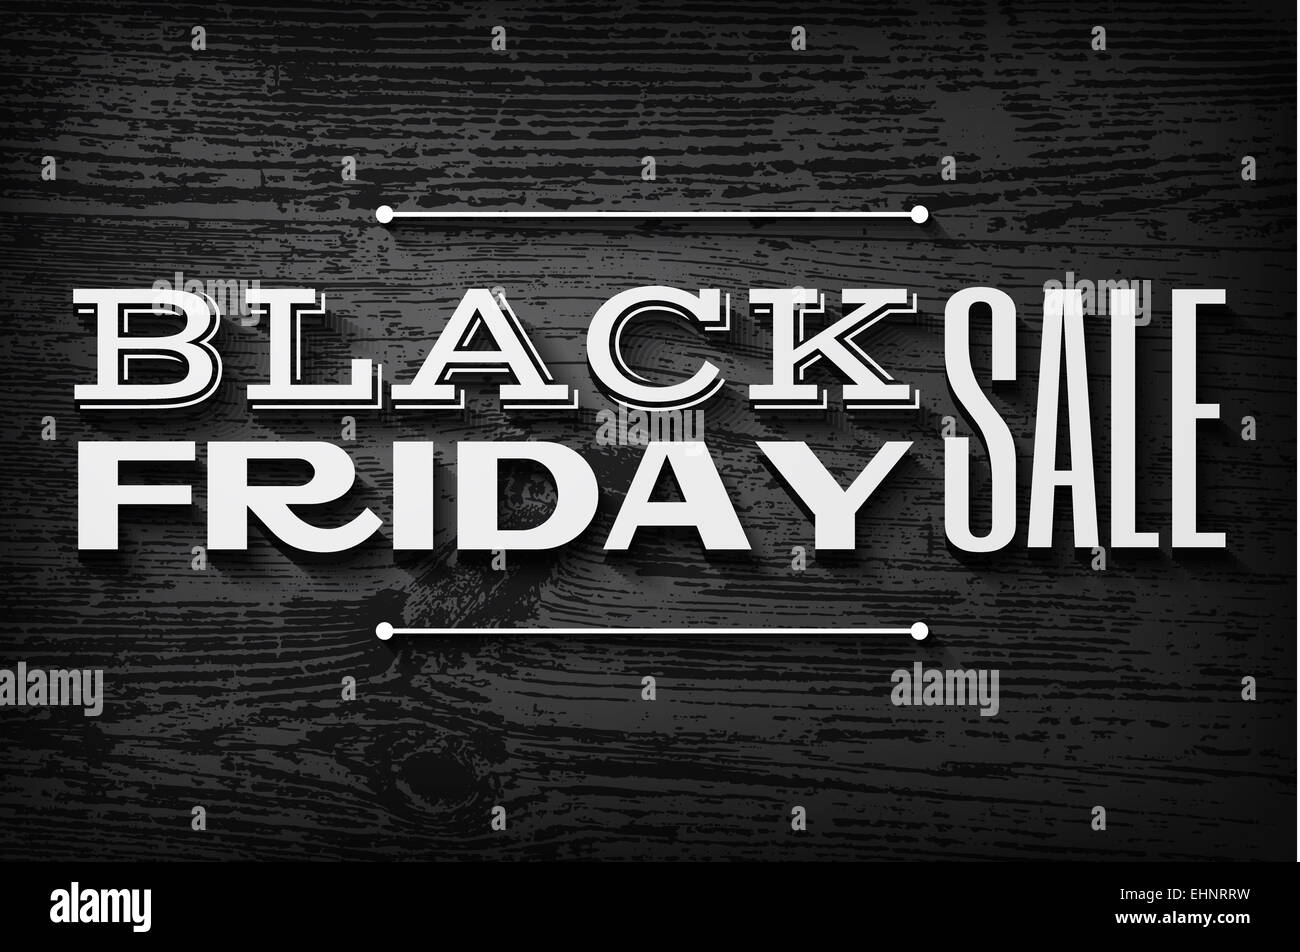 Black friday announcement on  vector wooden background Stock Photo